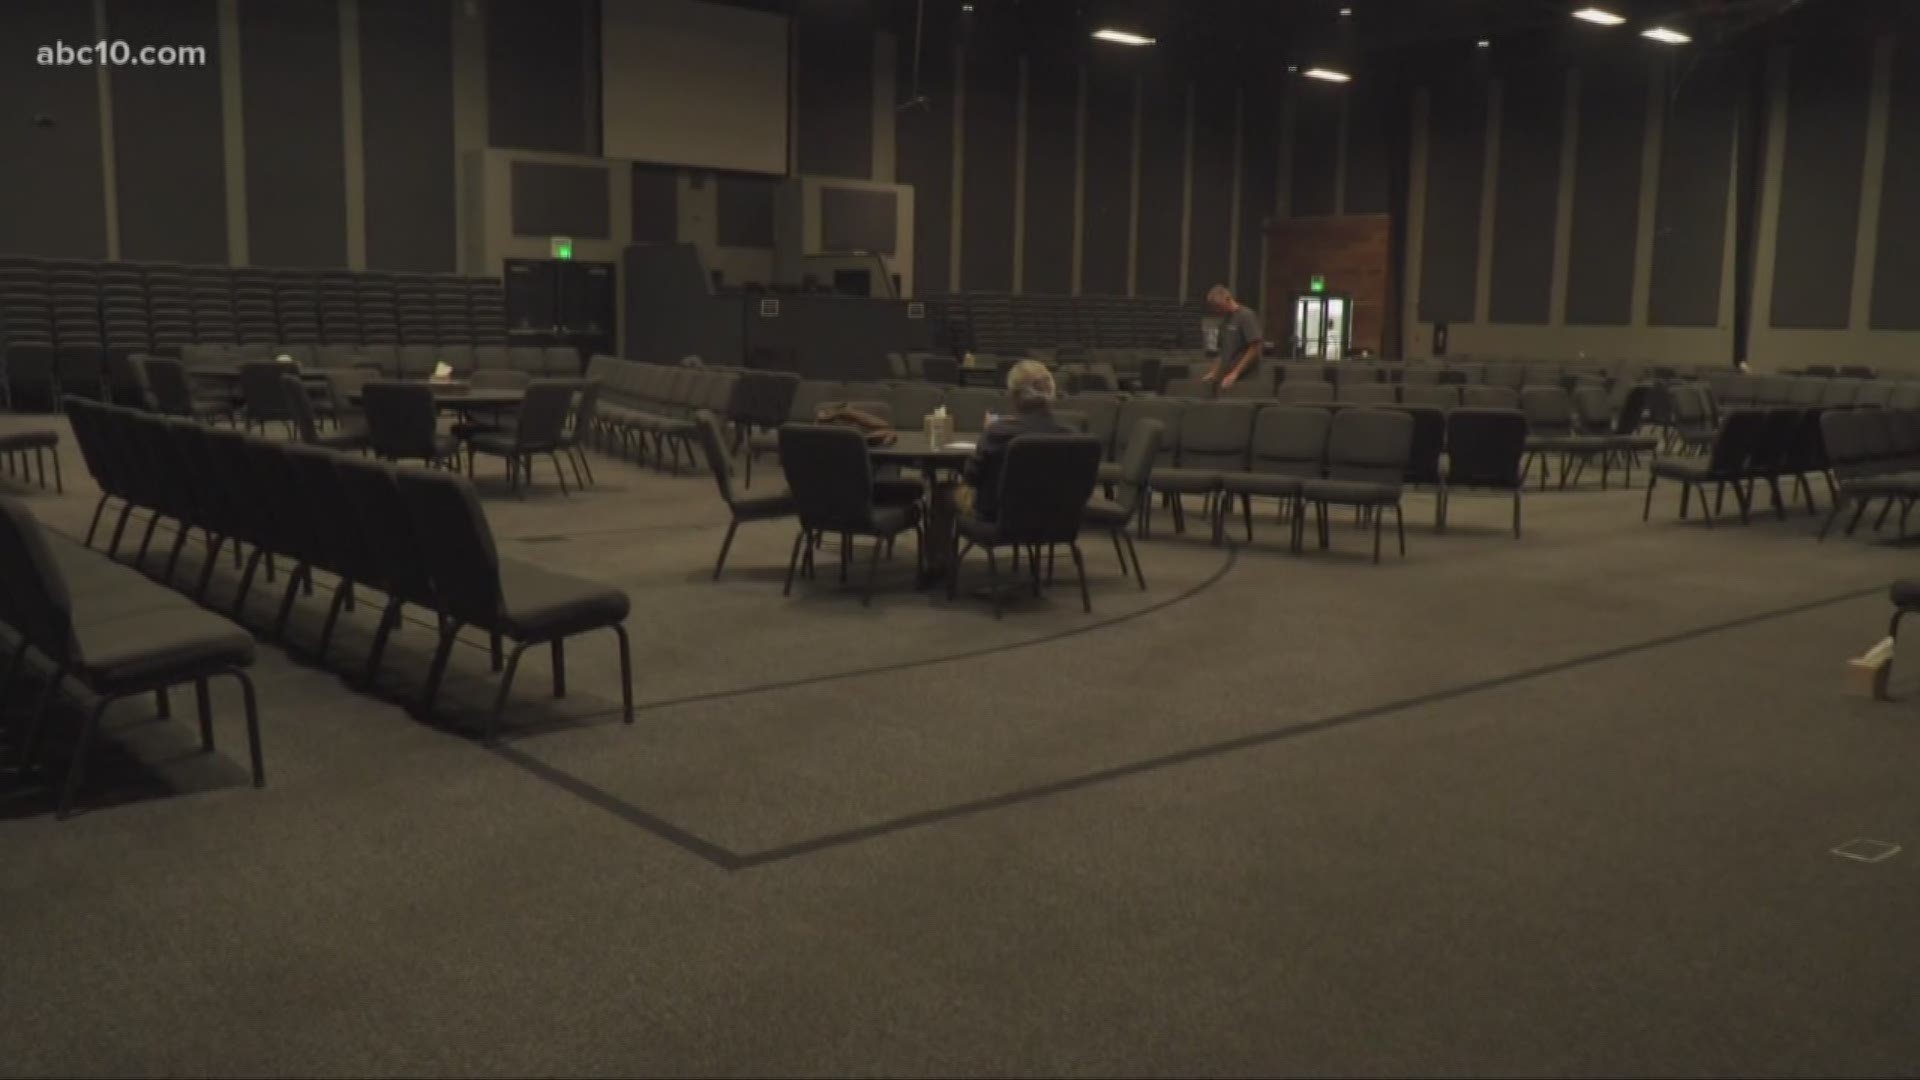 Something circulating online is the question of why Bethel Church didn't open their doors to people who had to evacuate. That's one of the first questions ABC10 asked when we got there.